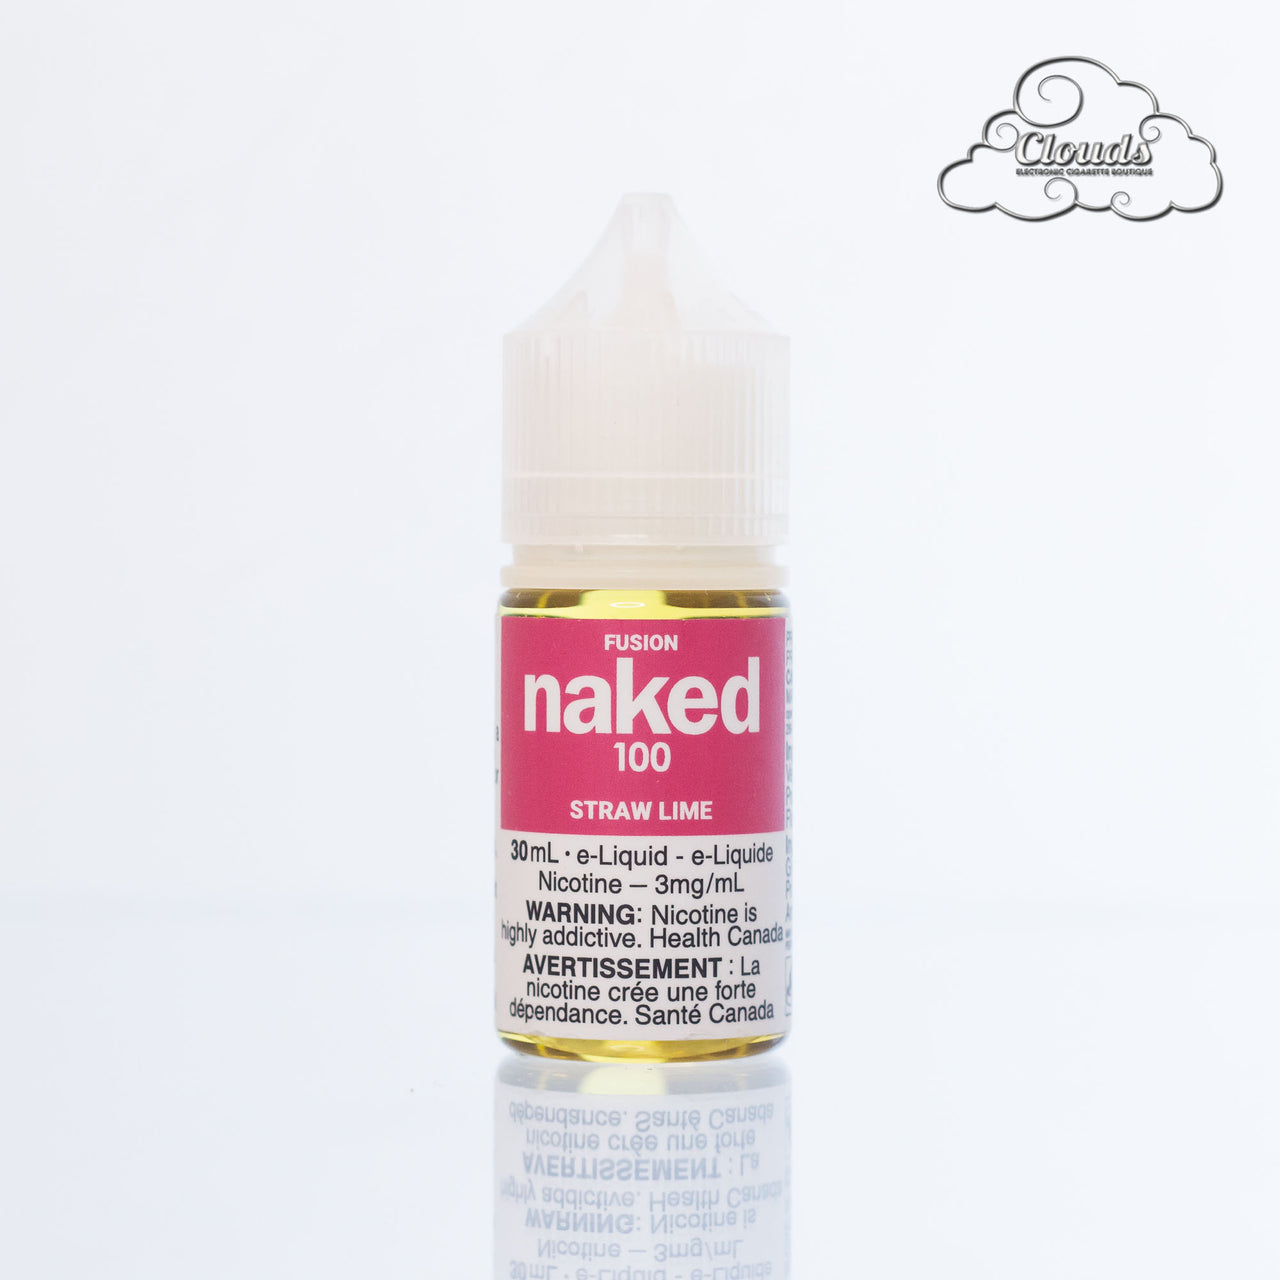 Naked 100 Straw Lime